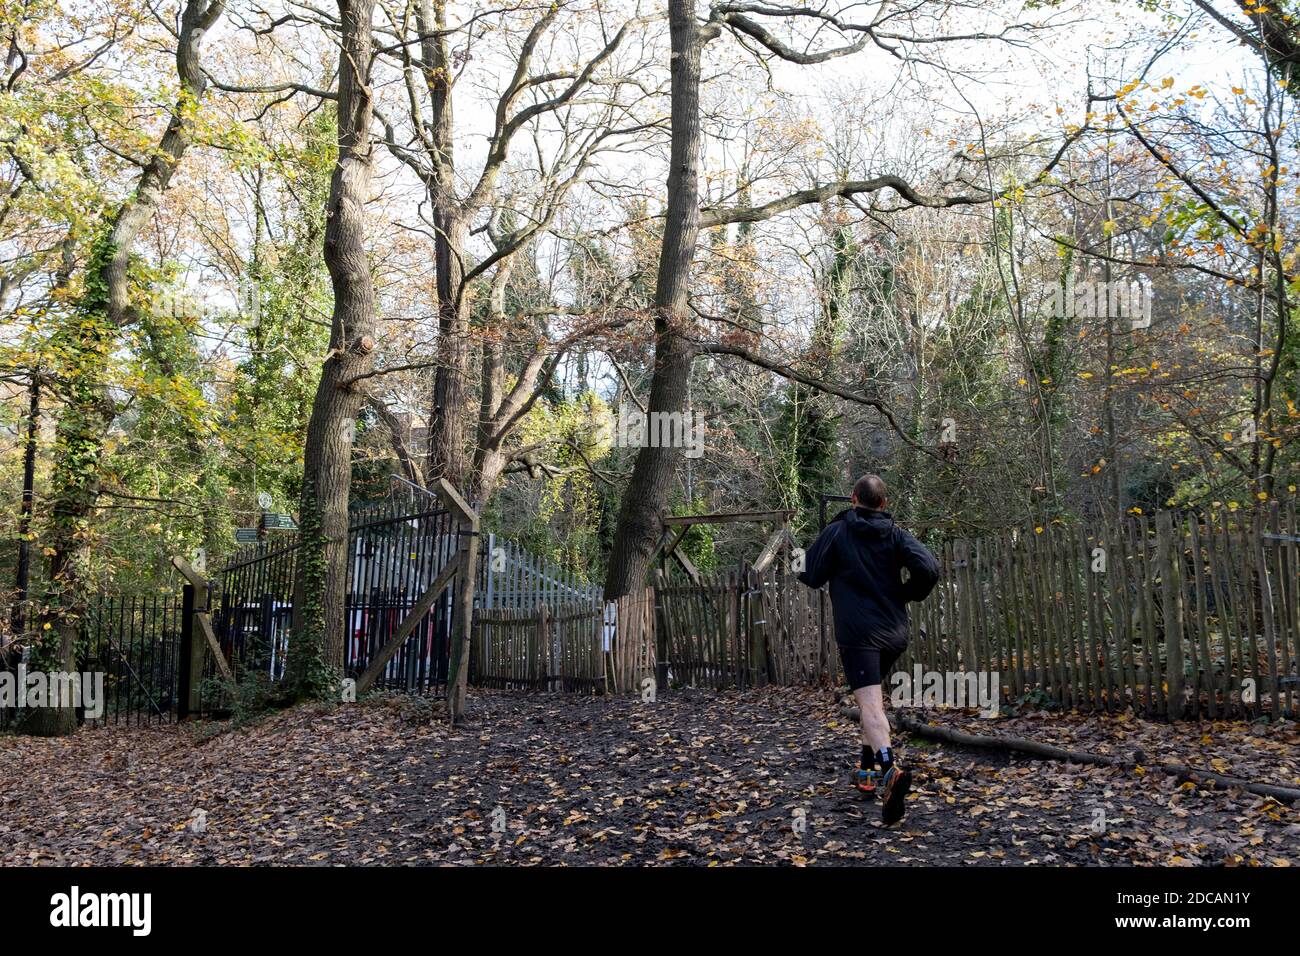 A runner approaches a gate where a protest is ongoing in Sydenham Hill Woods, against the proposed felling of two 100+ year-old oak trees, threatened by Southwark Council because of their proximity to 'Pissarro's' footbridge whose renovation has been deemed necessary by the local authority, on 18th November 2020, in London, England. The Nunhead to Crystal Palace (High Level) railway once passed through the Wood and Impressionist artist  Camille Pissarro (1830–1903) famously painted a railway landscape from the bridge in the 1870s. Sydenham Hill Wood forms part of the largest remaining tract of Stock Photo